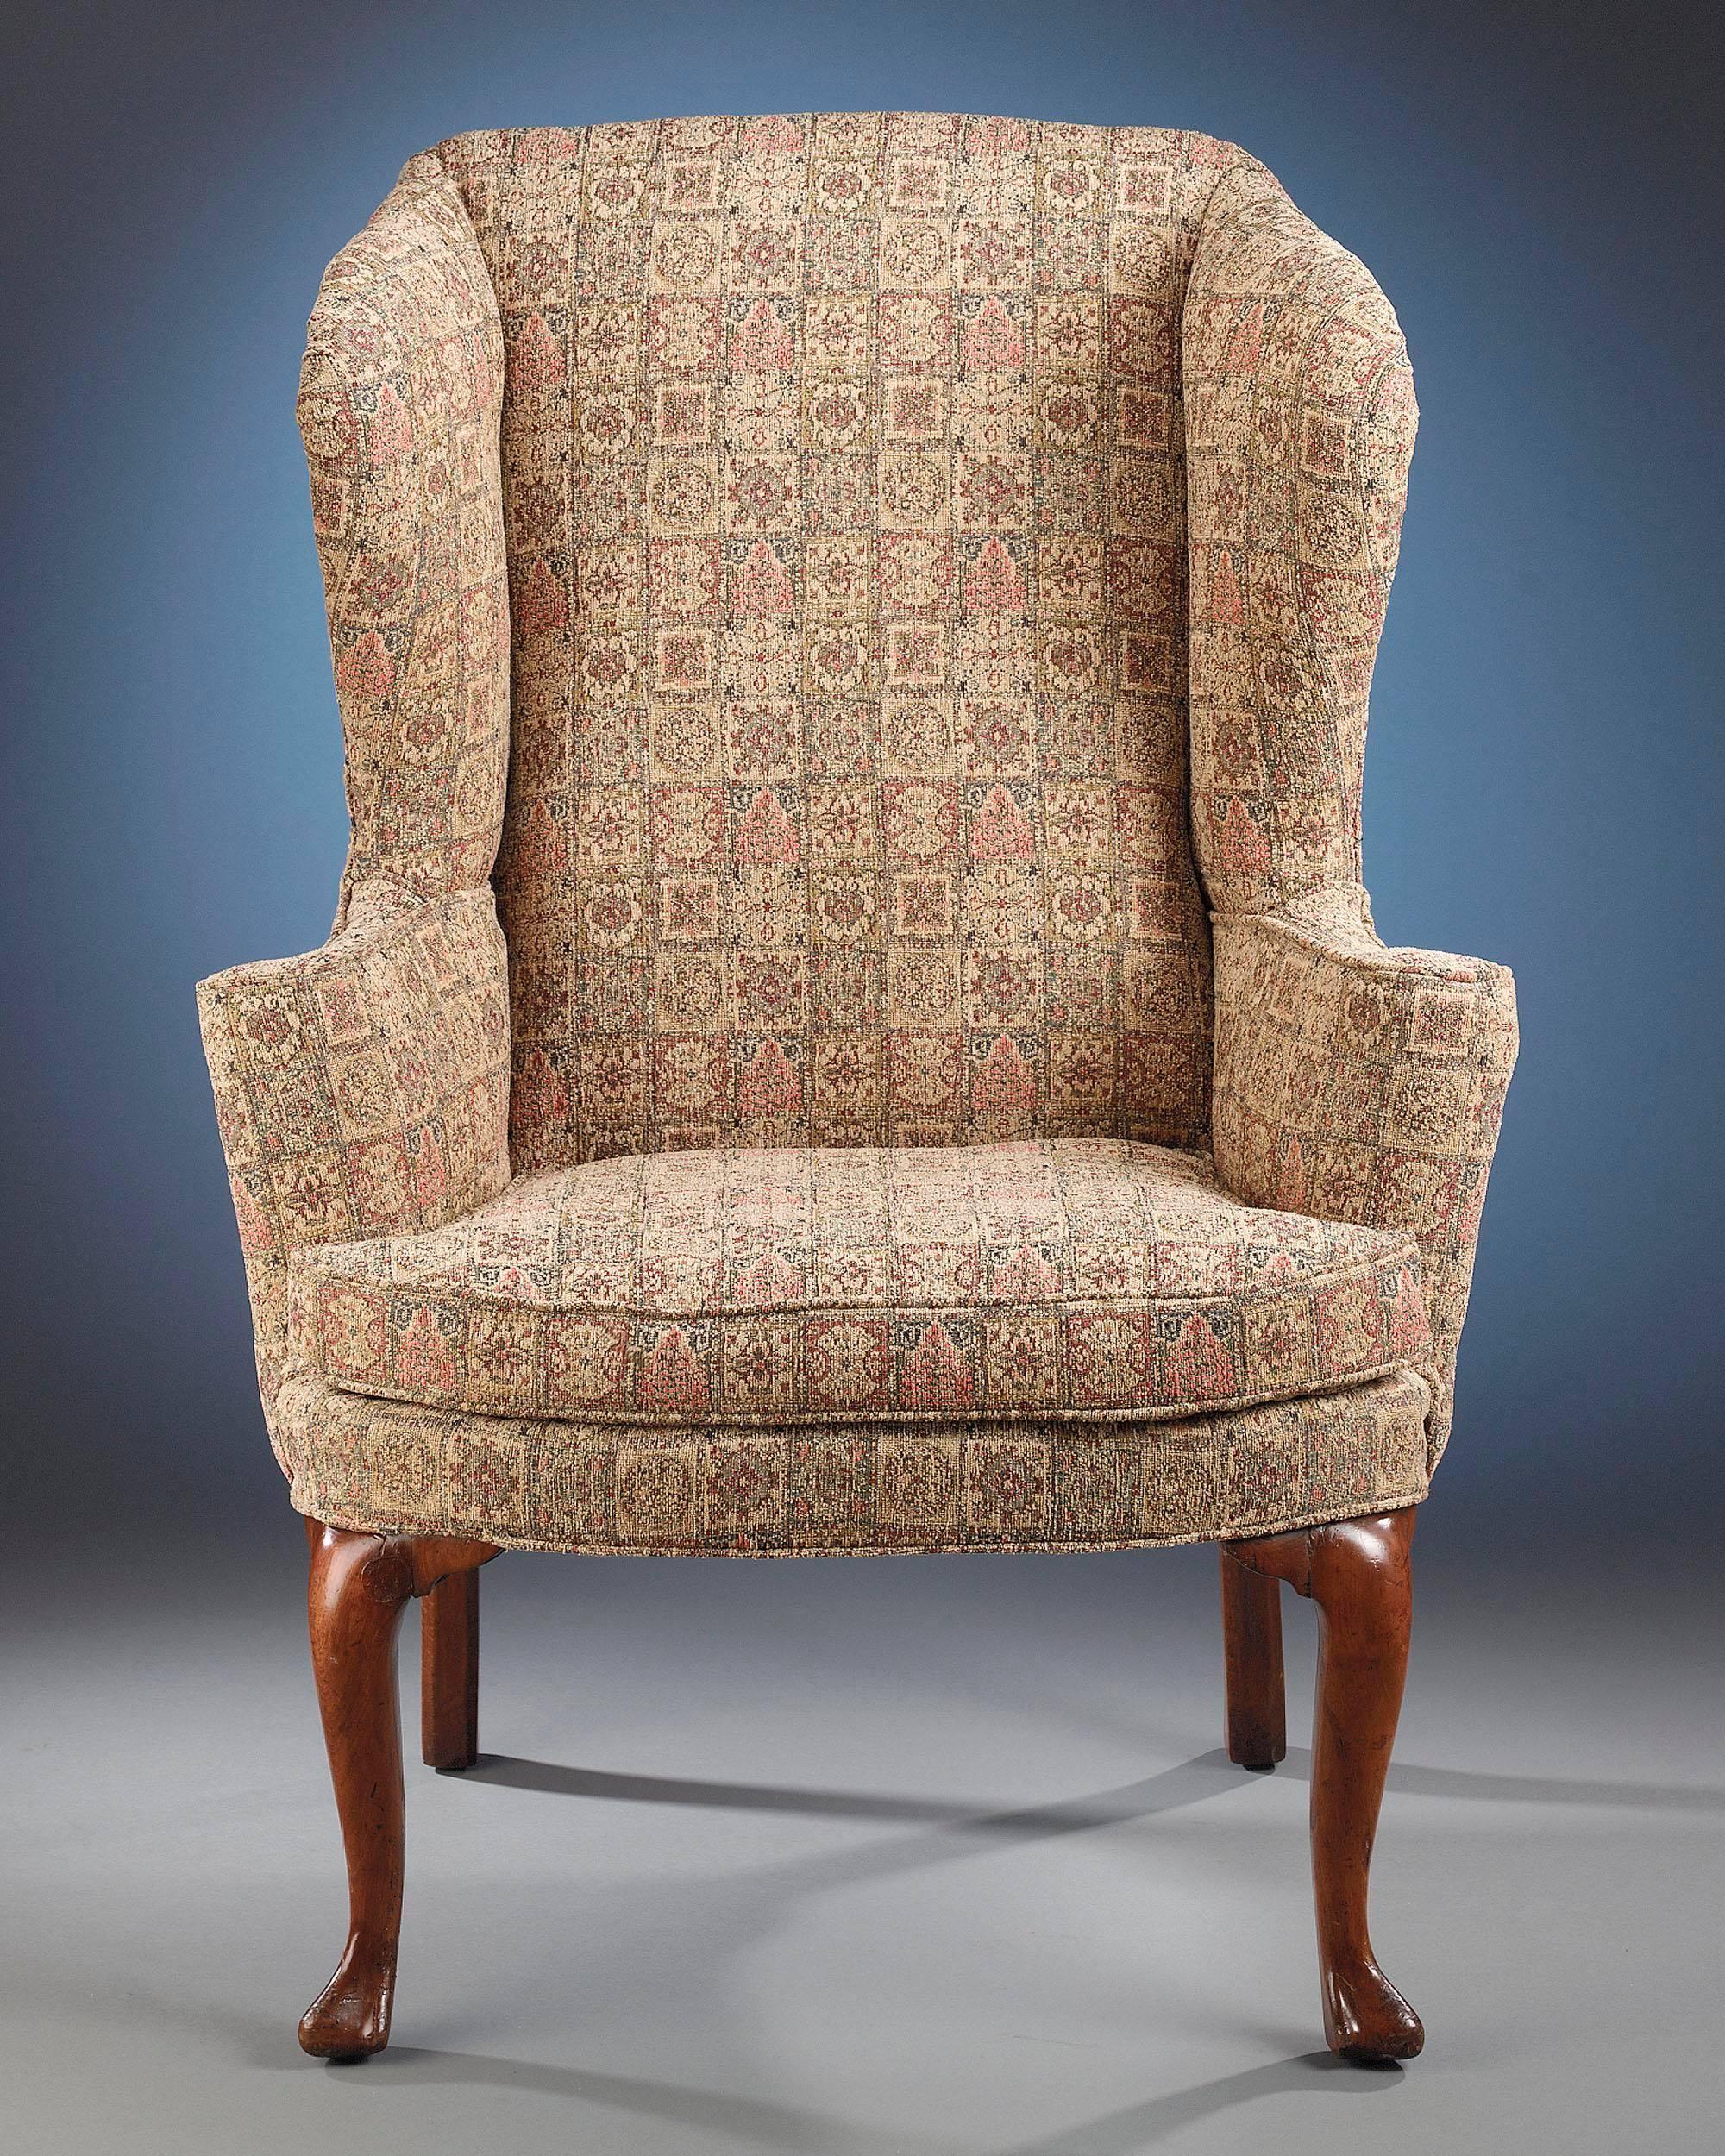 The wingback chair was designed to provide the ultimate in comfort while maintaining aesthetic appeal. Beautifully proportioned, this Irish mahogany chair emphasizes elegance and simplicity. The chair's fine cabriole legs and trifid feet make it a